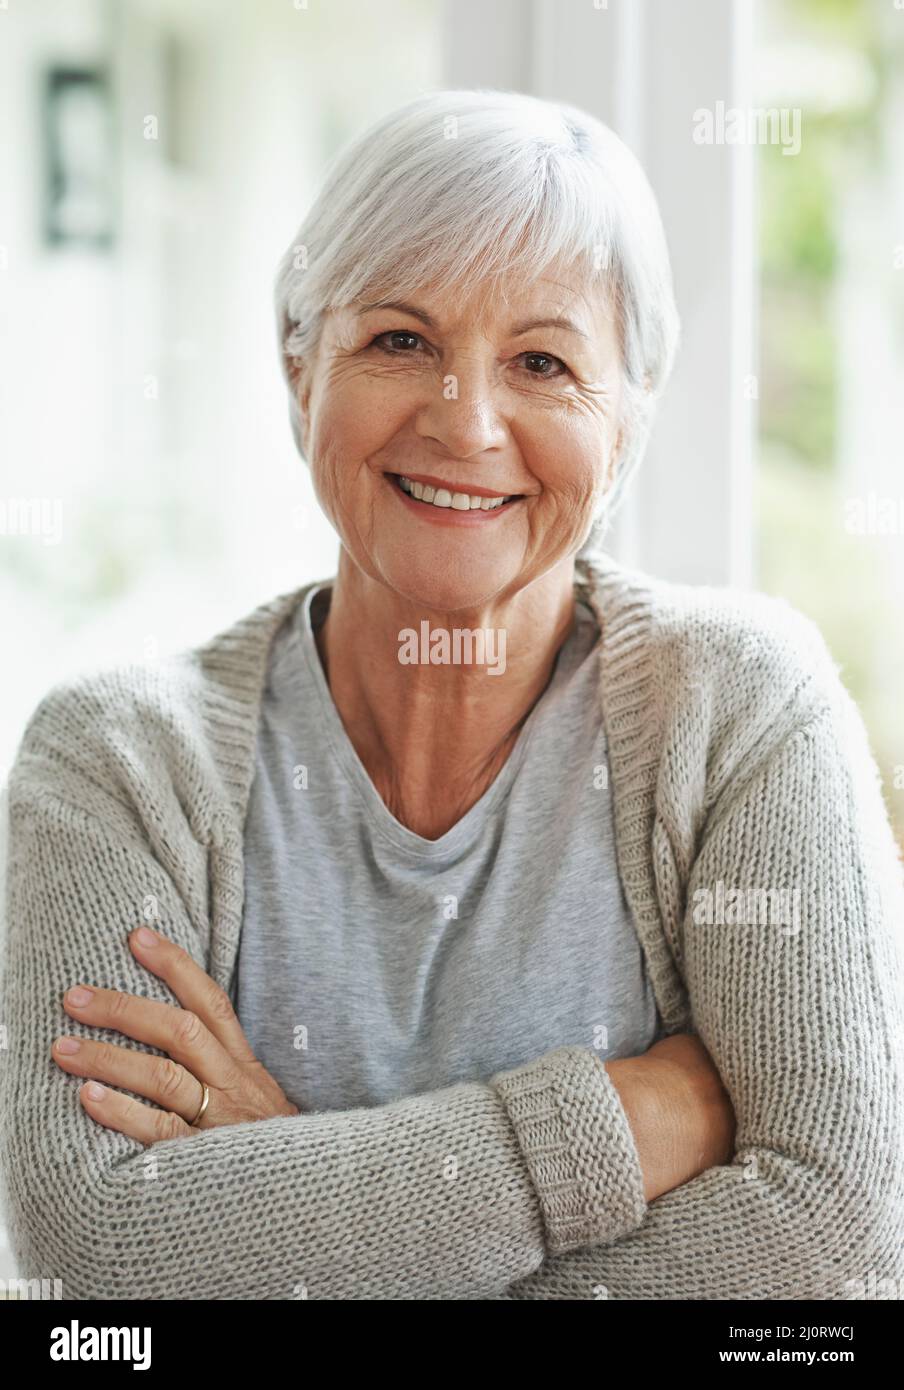 Happy in the knowledge that Ive planned for my retirement. A happy senior woman smiling at the camera as she sits in her home. Stock Photo